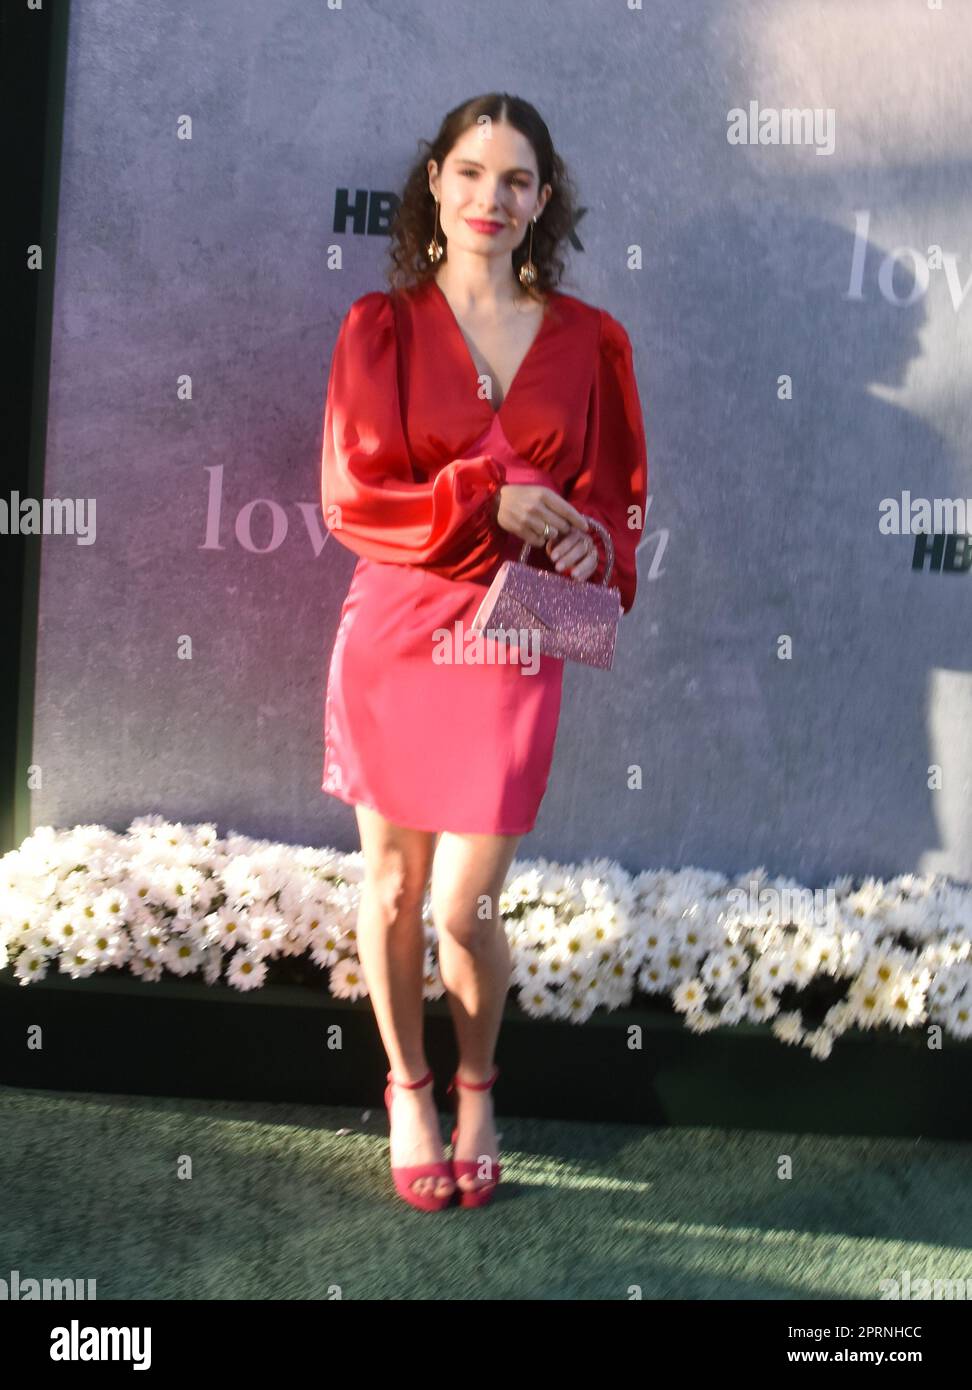 Los Angeles, California, USA 26th April 2023 Actress Olivia Applegate attends the Los Angeles premiere of Max Original Limited Series 'Love & Death' at Director's Guild of America on April 26, 2023 in Los Angeles, California, USA. Photo by Barry King/Alamy Live News Stock Photo